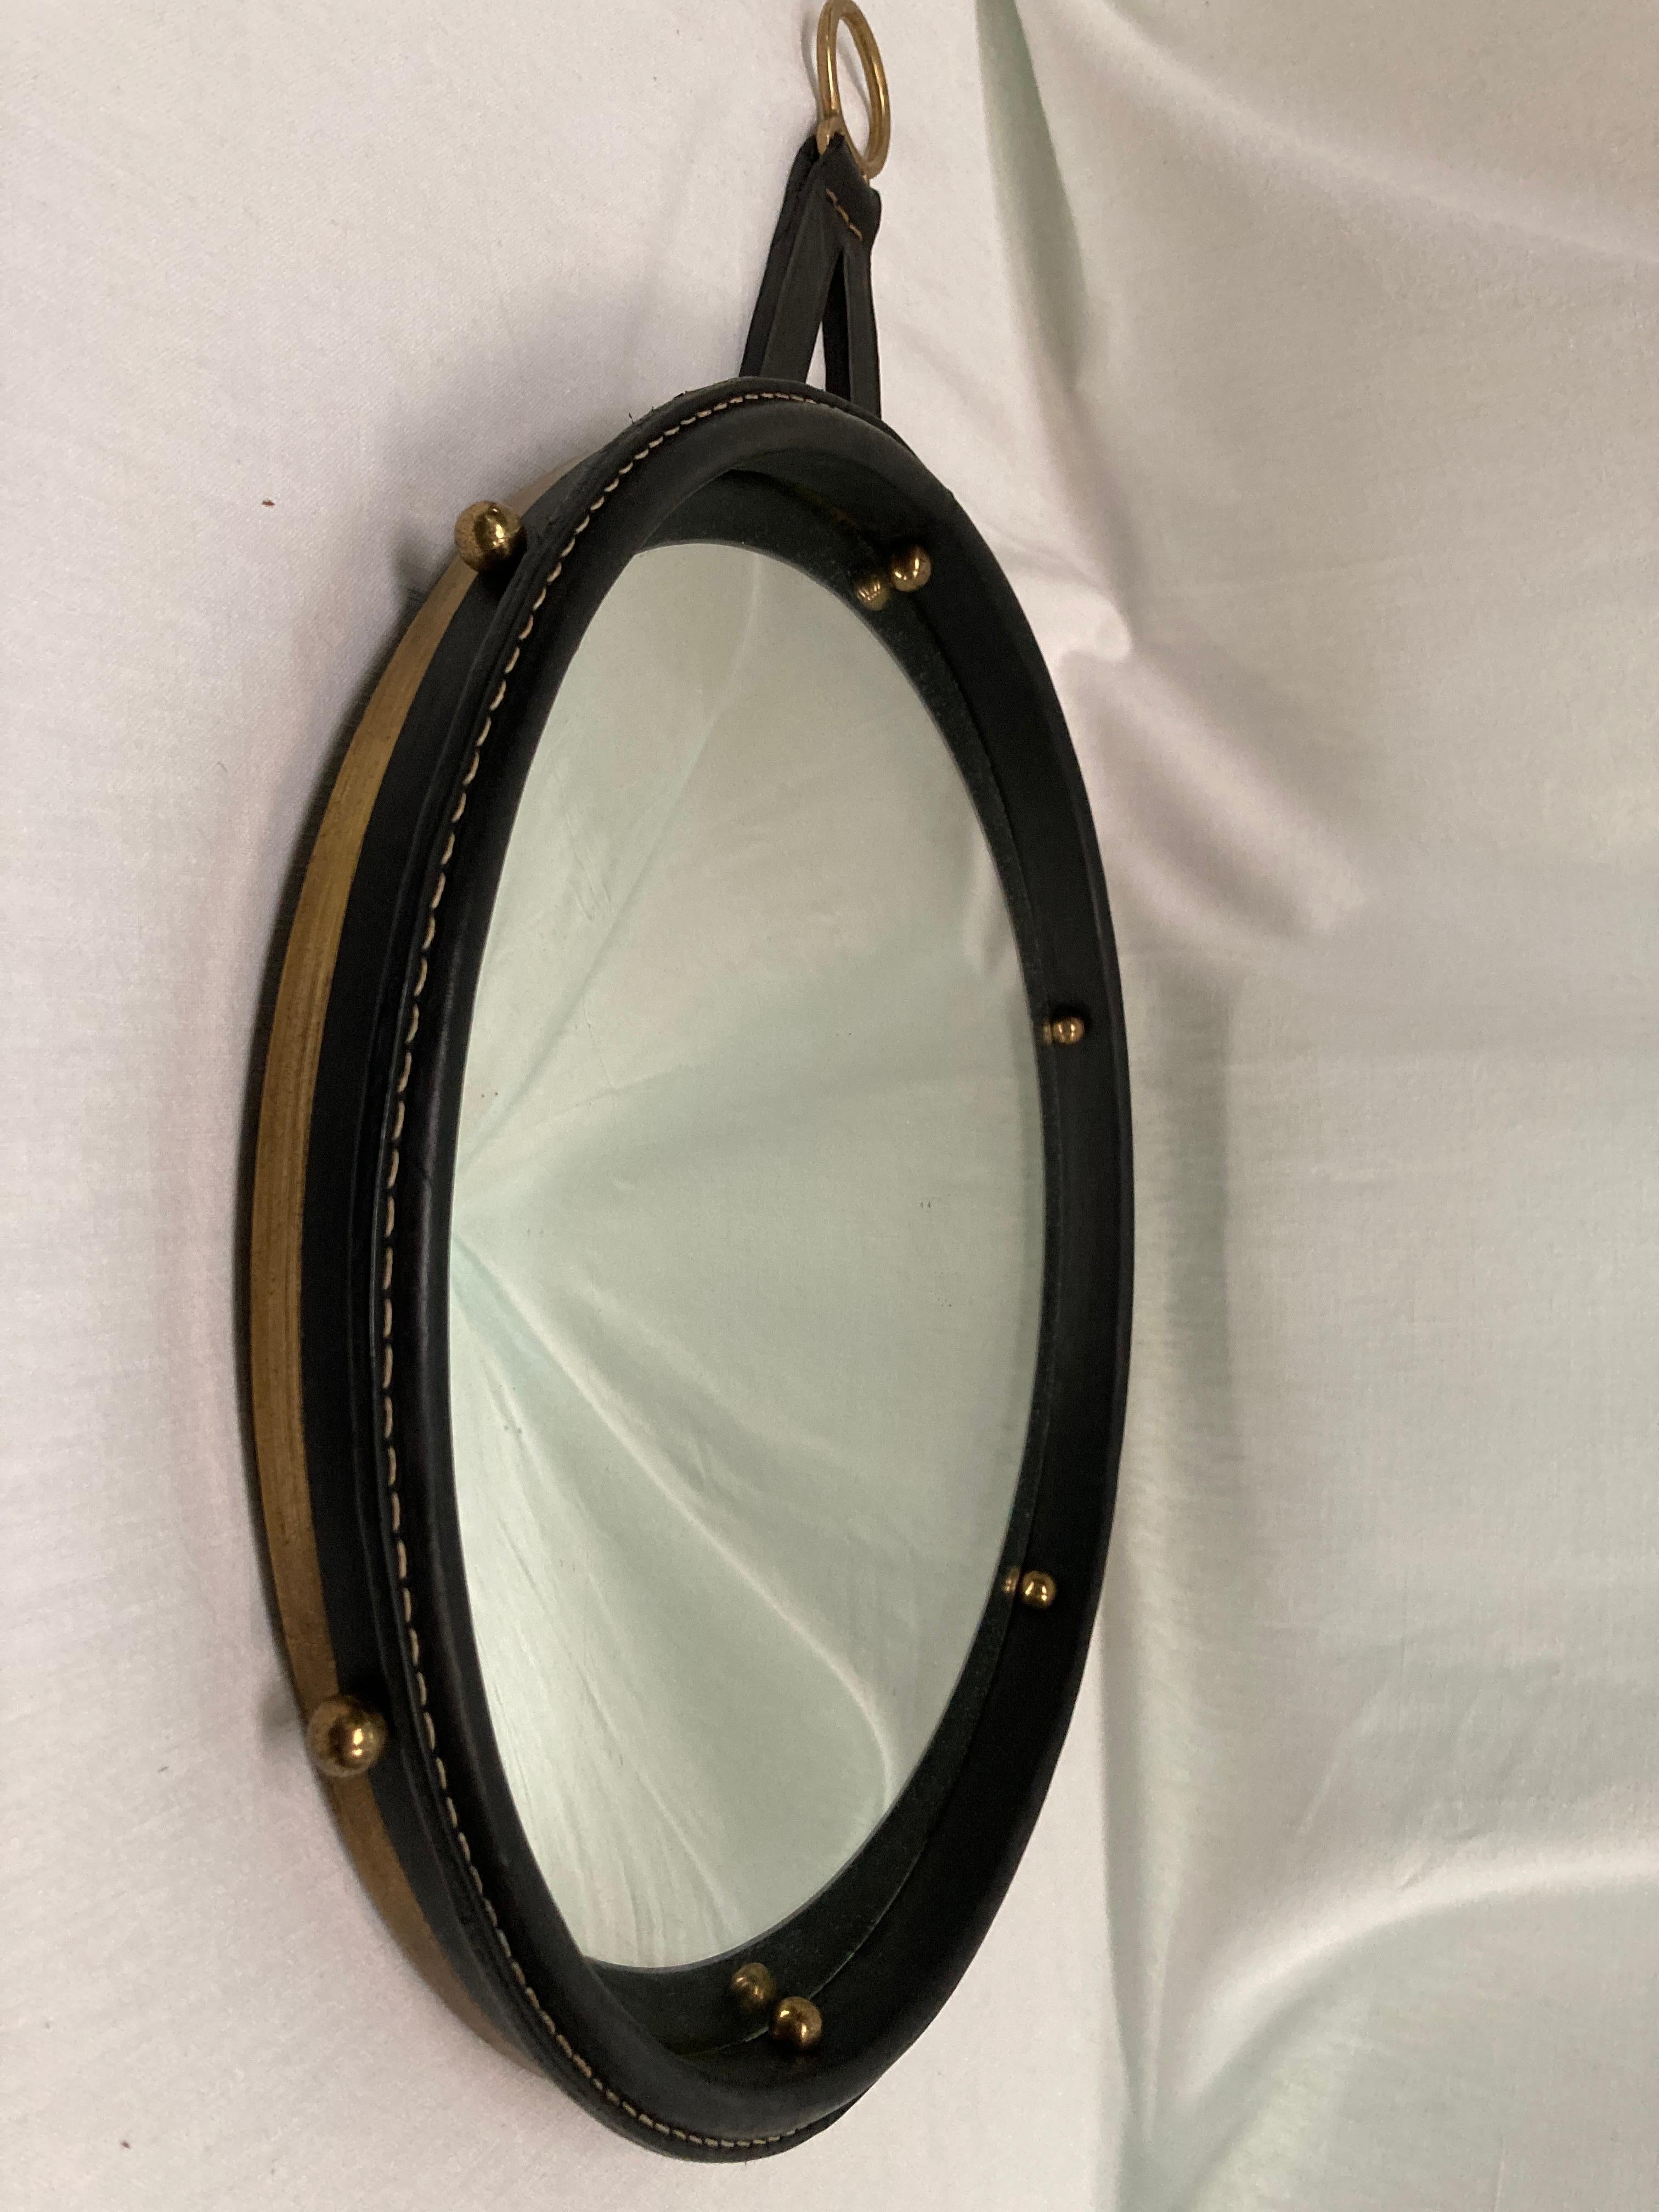 1950's wall convex mirror by Jacques Adnet
Great condition
Leather and brass
Rare piece
